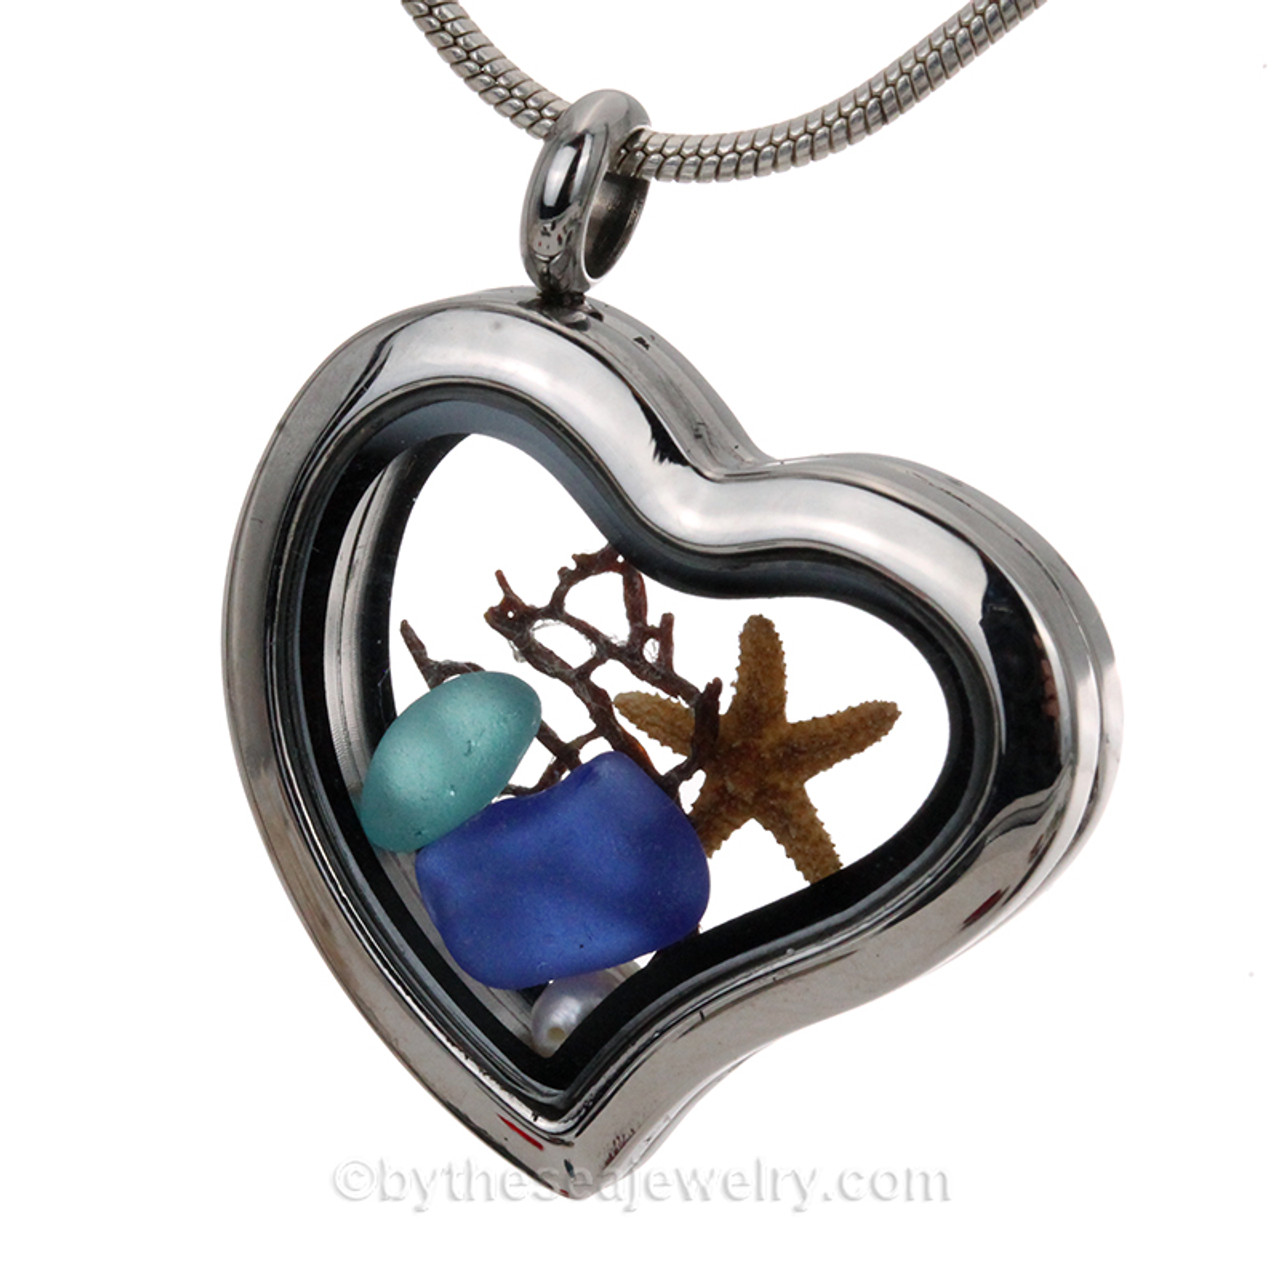 Tropical Lover - Aqua and Blue Sea Glass Heart In A Stainless